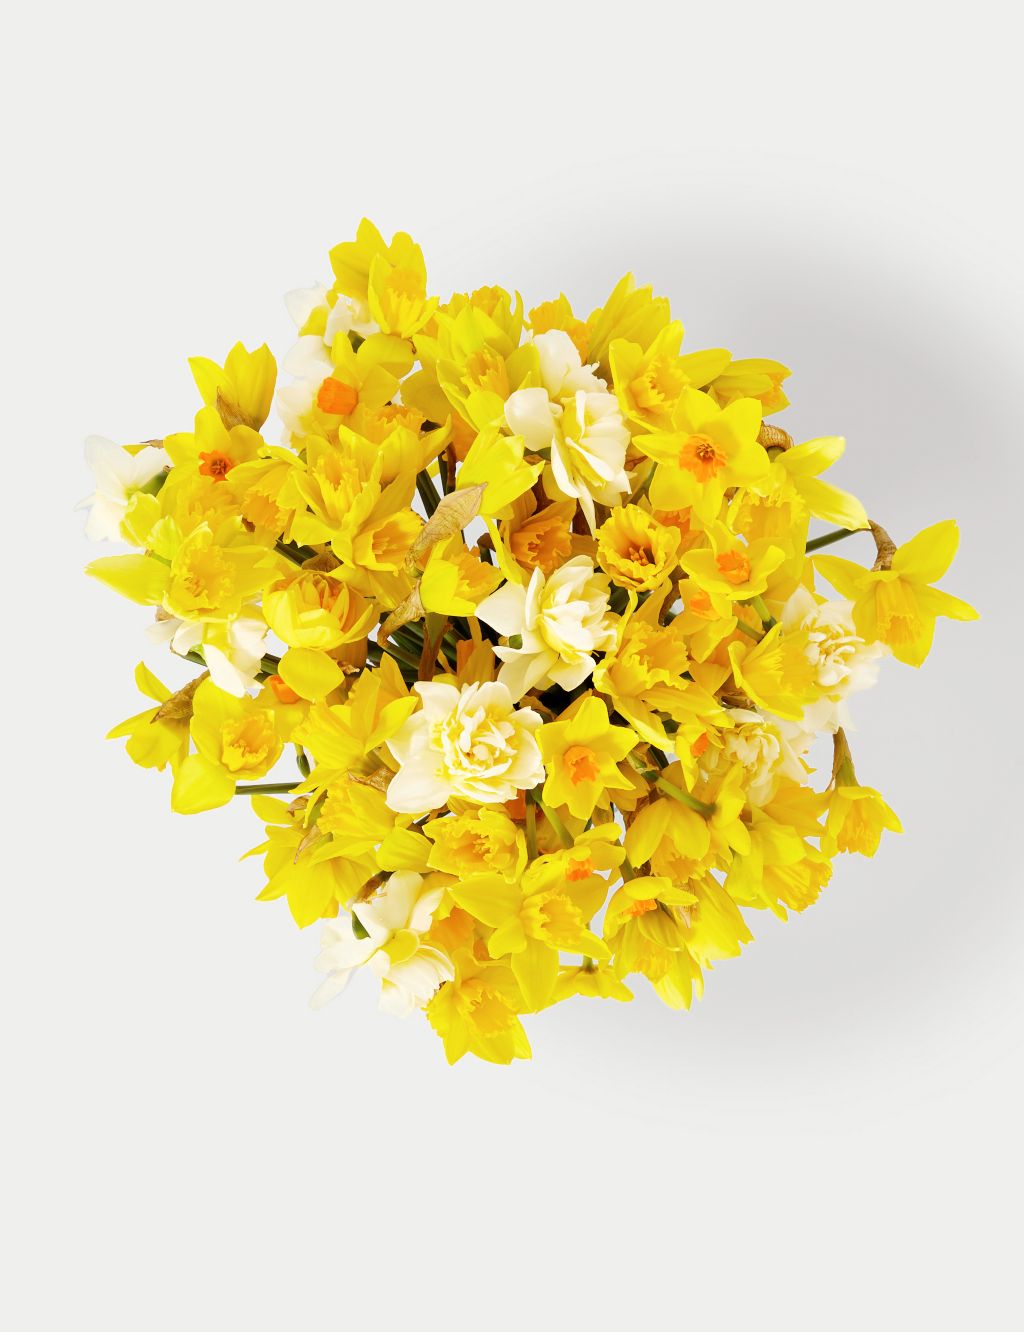 100 British Daffodils & Narcissus Bouquet 1 of 5